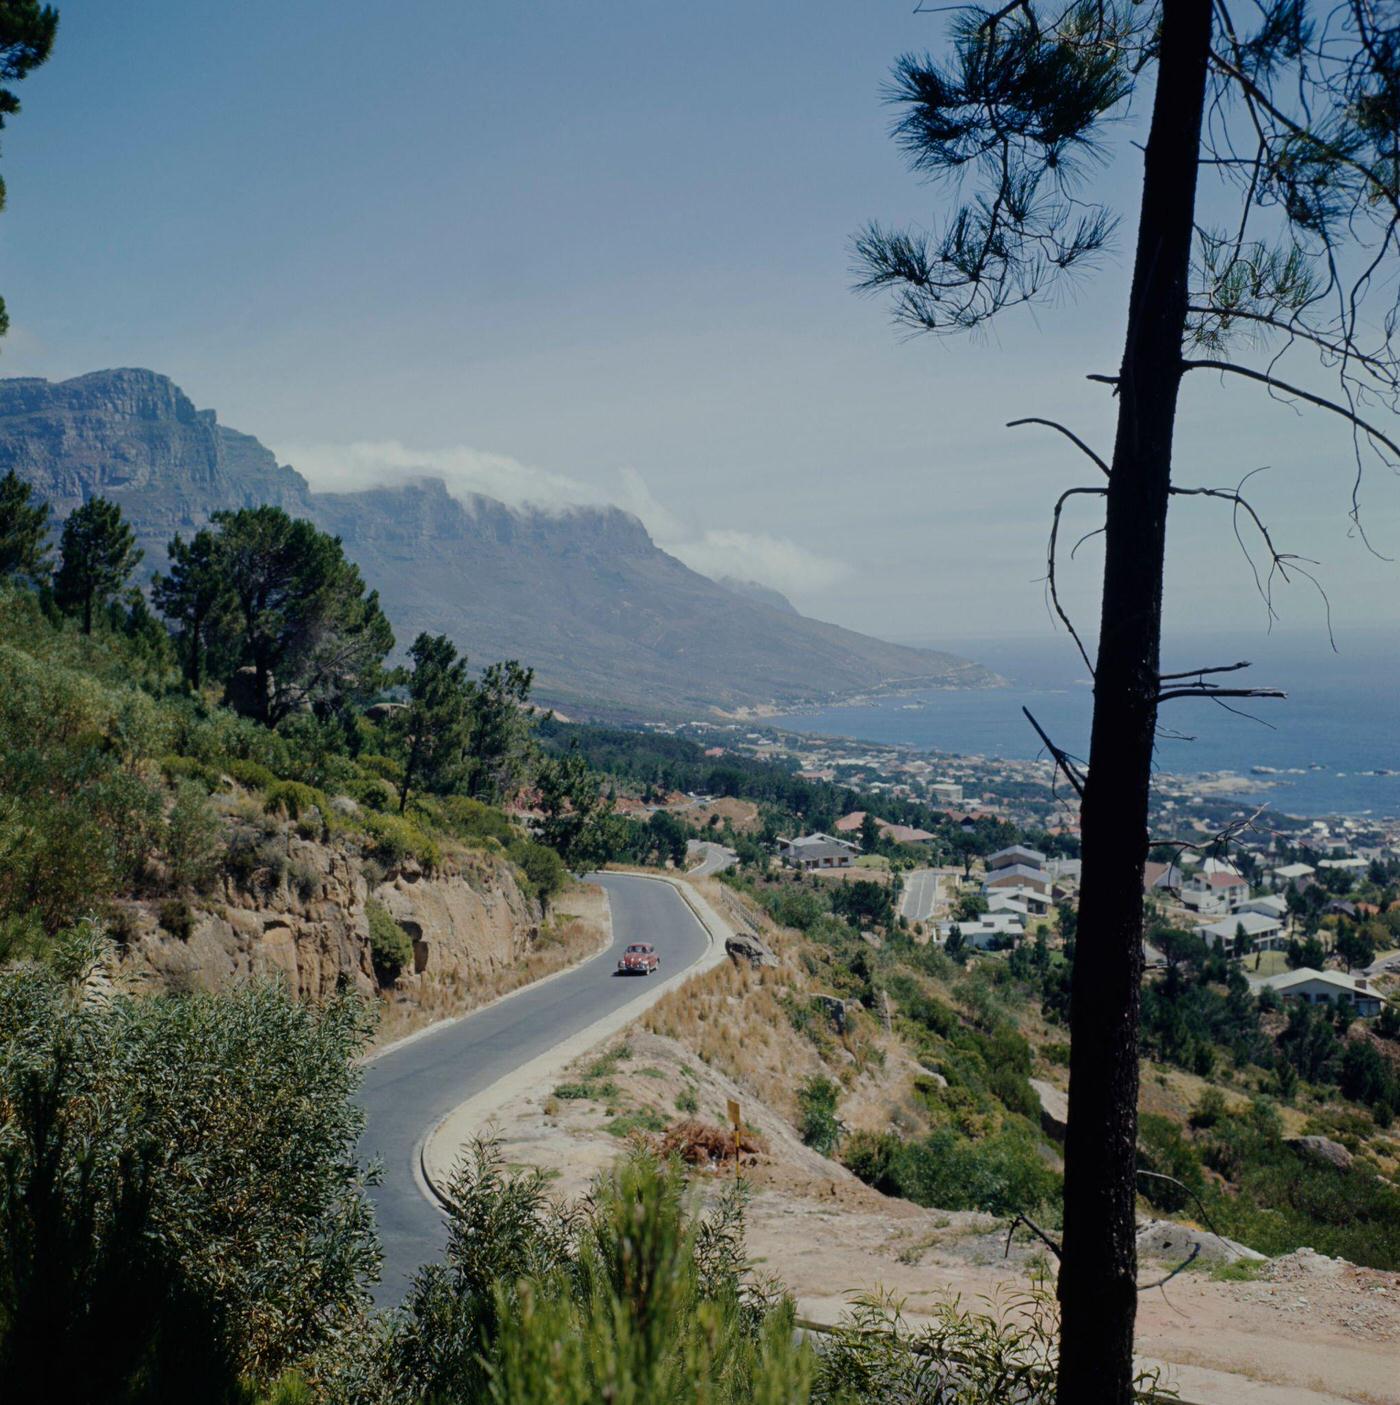 A car drives along a road above Camps Bay, a suburb of Cape Town overlooking the Atlantic Ocean, 1966